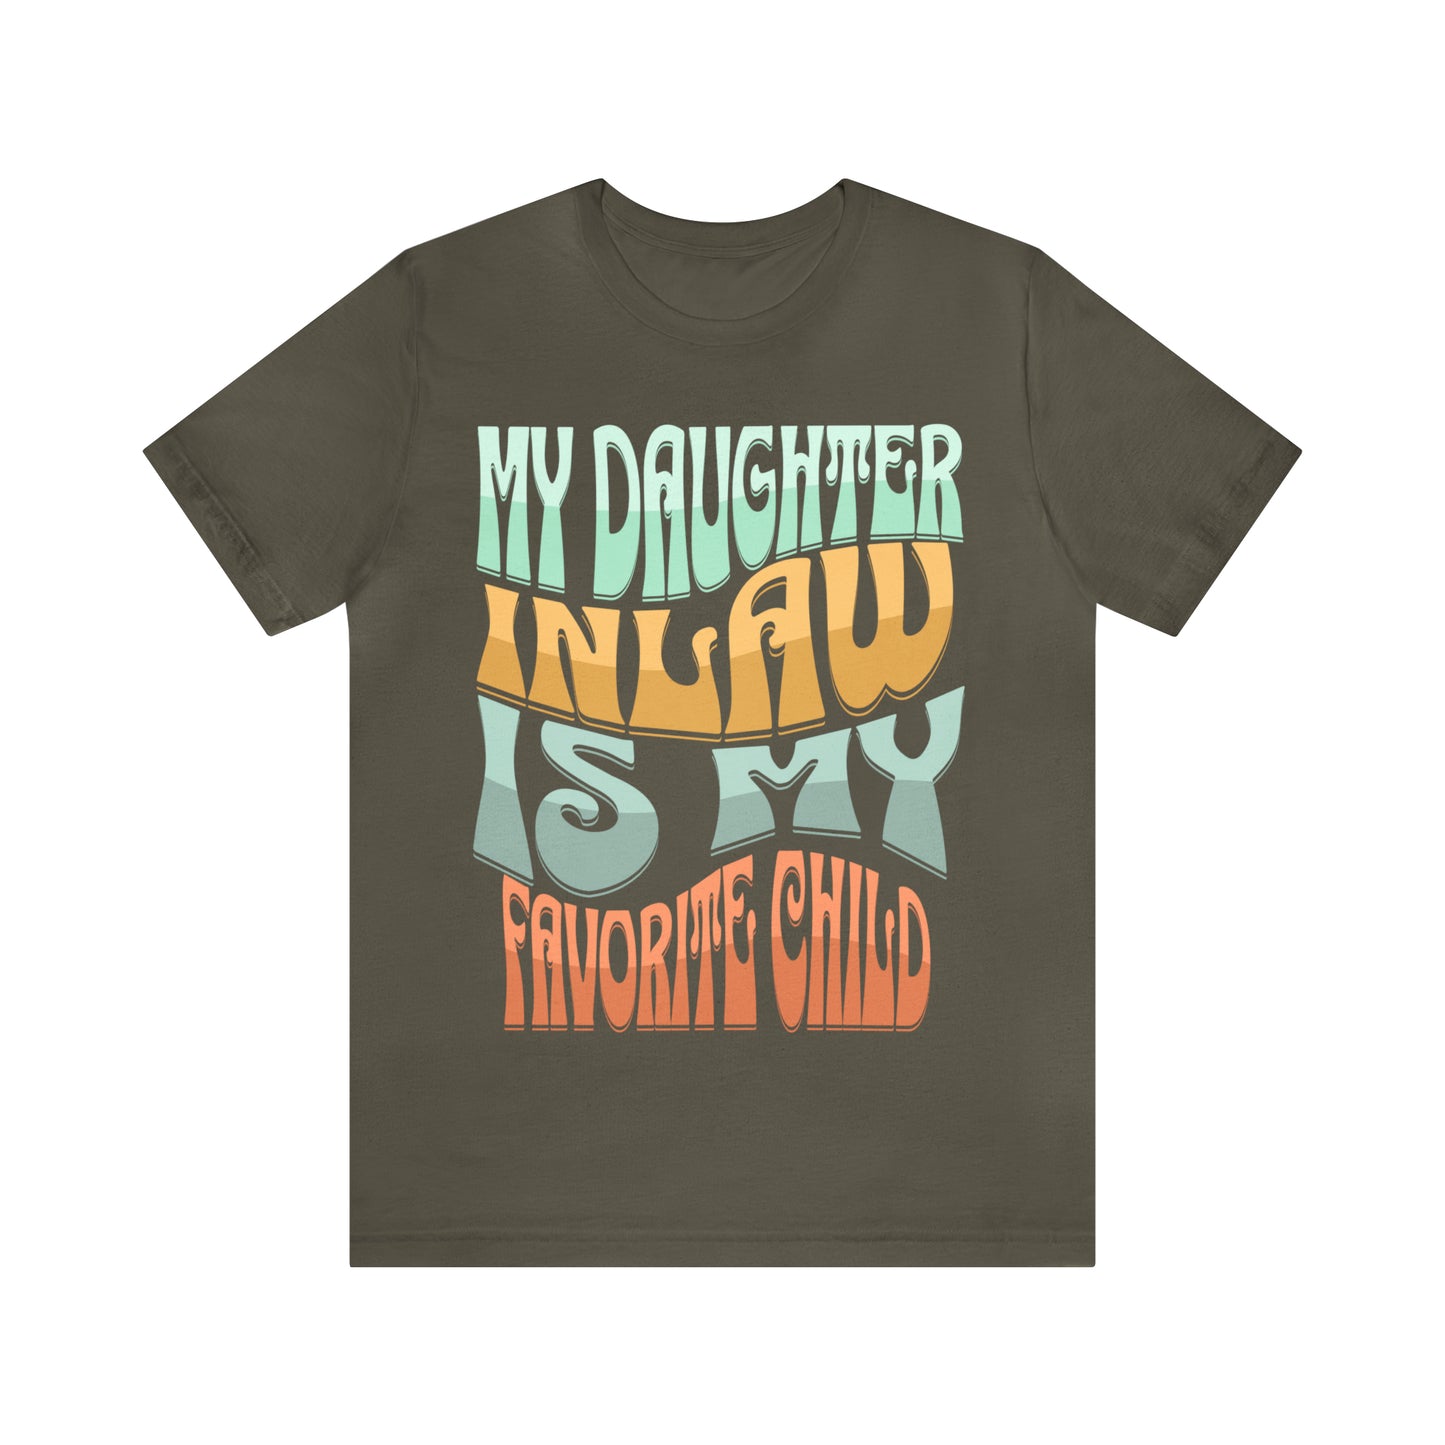 "Unisex 'My Daughter-In-Law Is My Favorite Child' Jersey Tee | Perfect for Parents-in-Law"